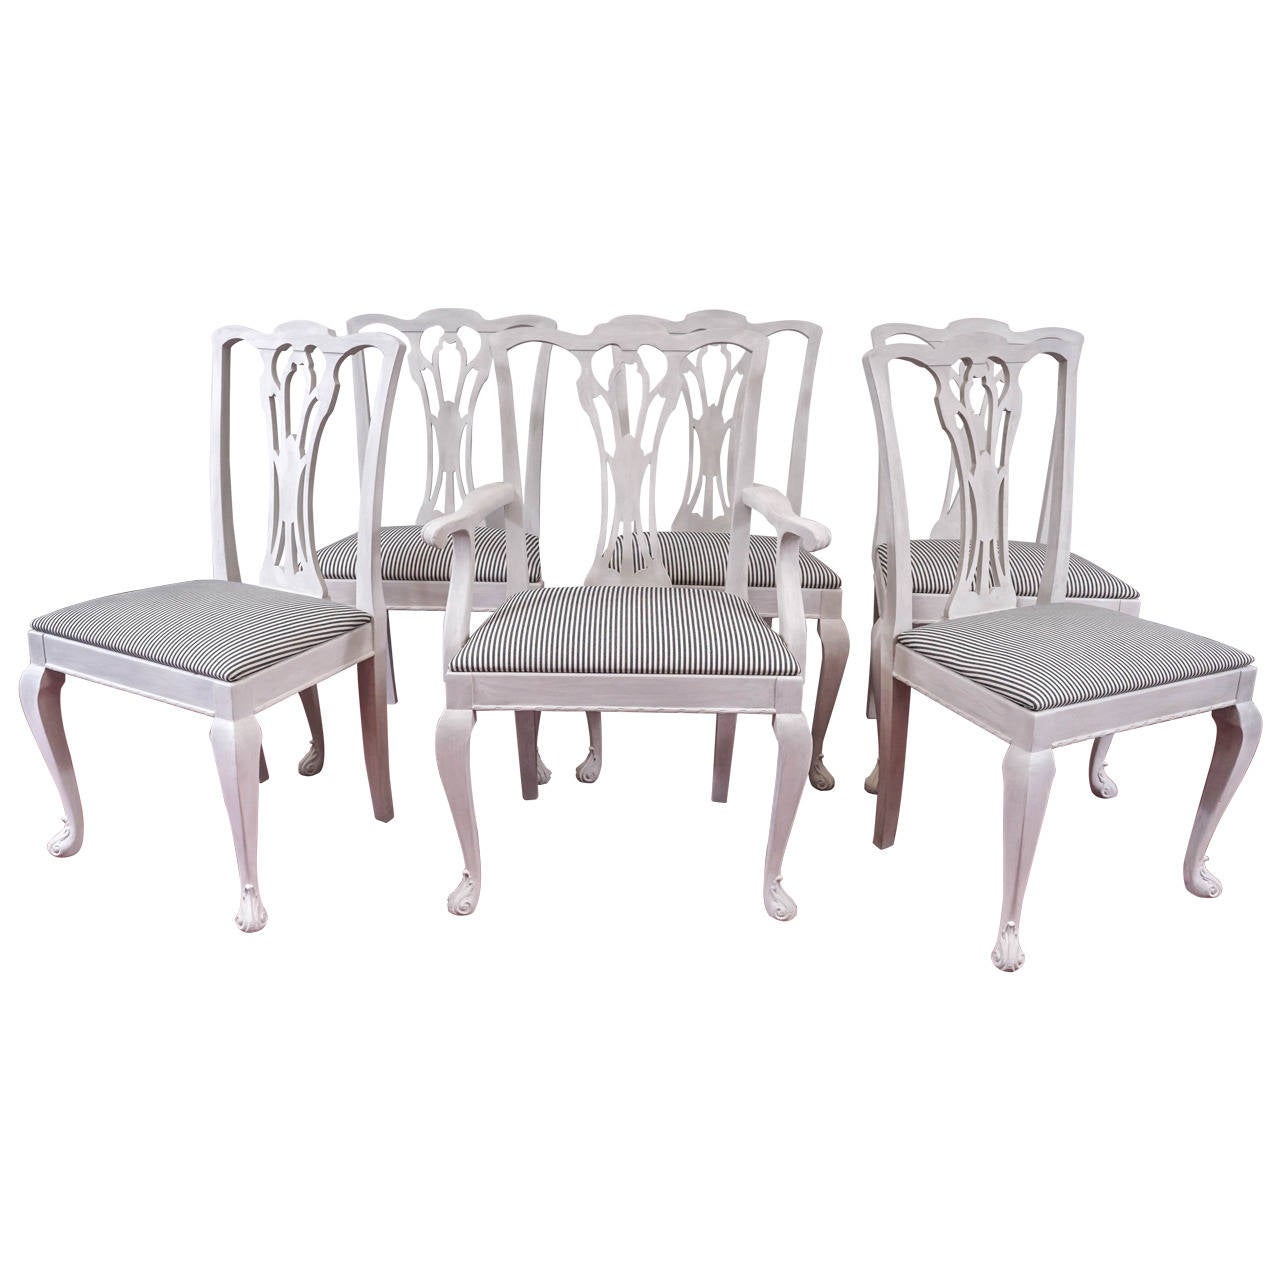 Six Painted Chippendale-Style Dining Chairs